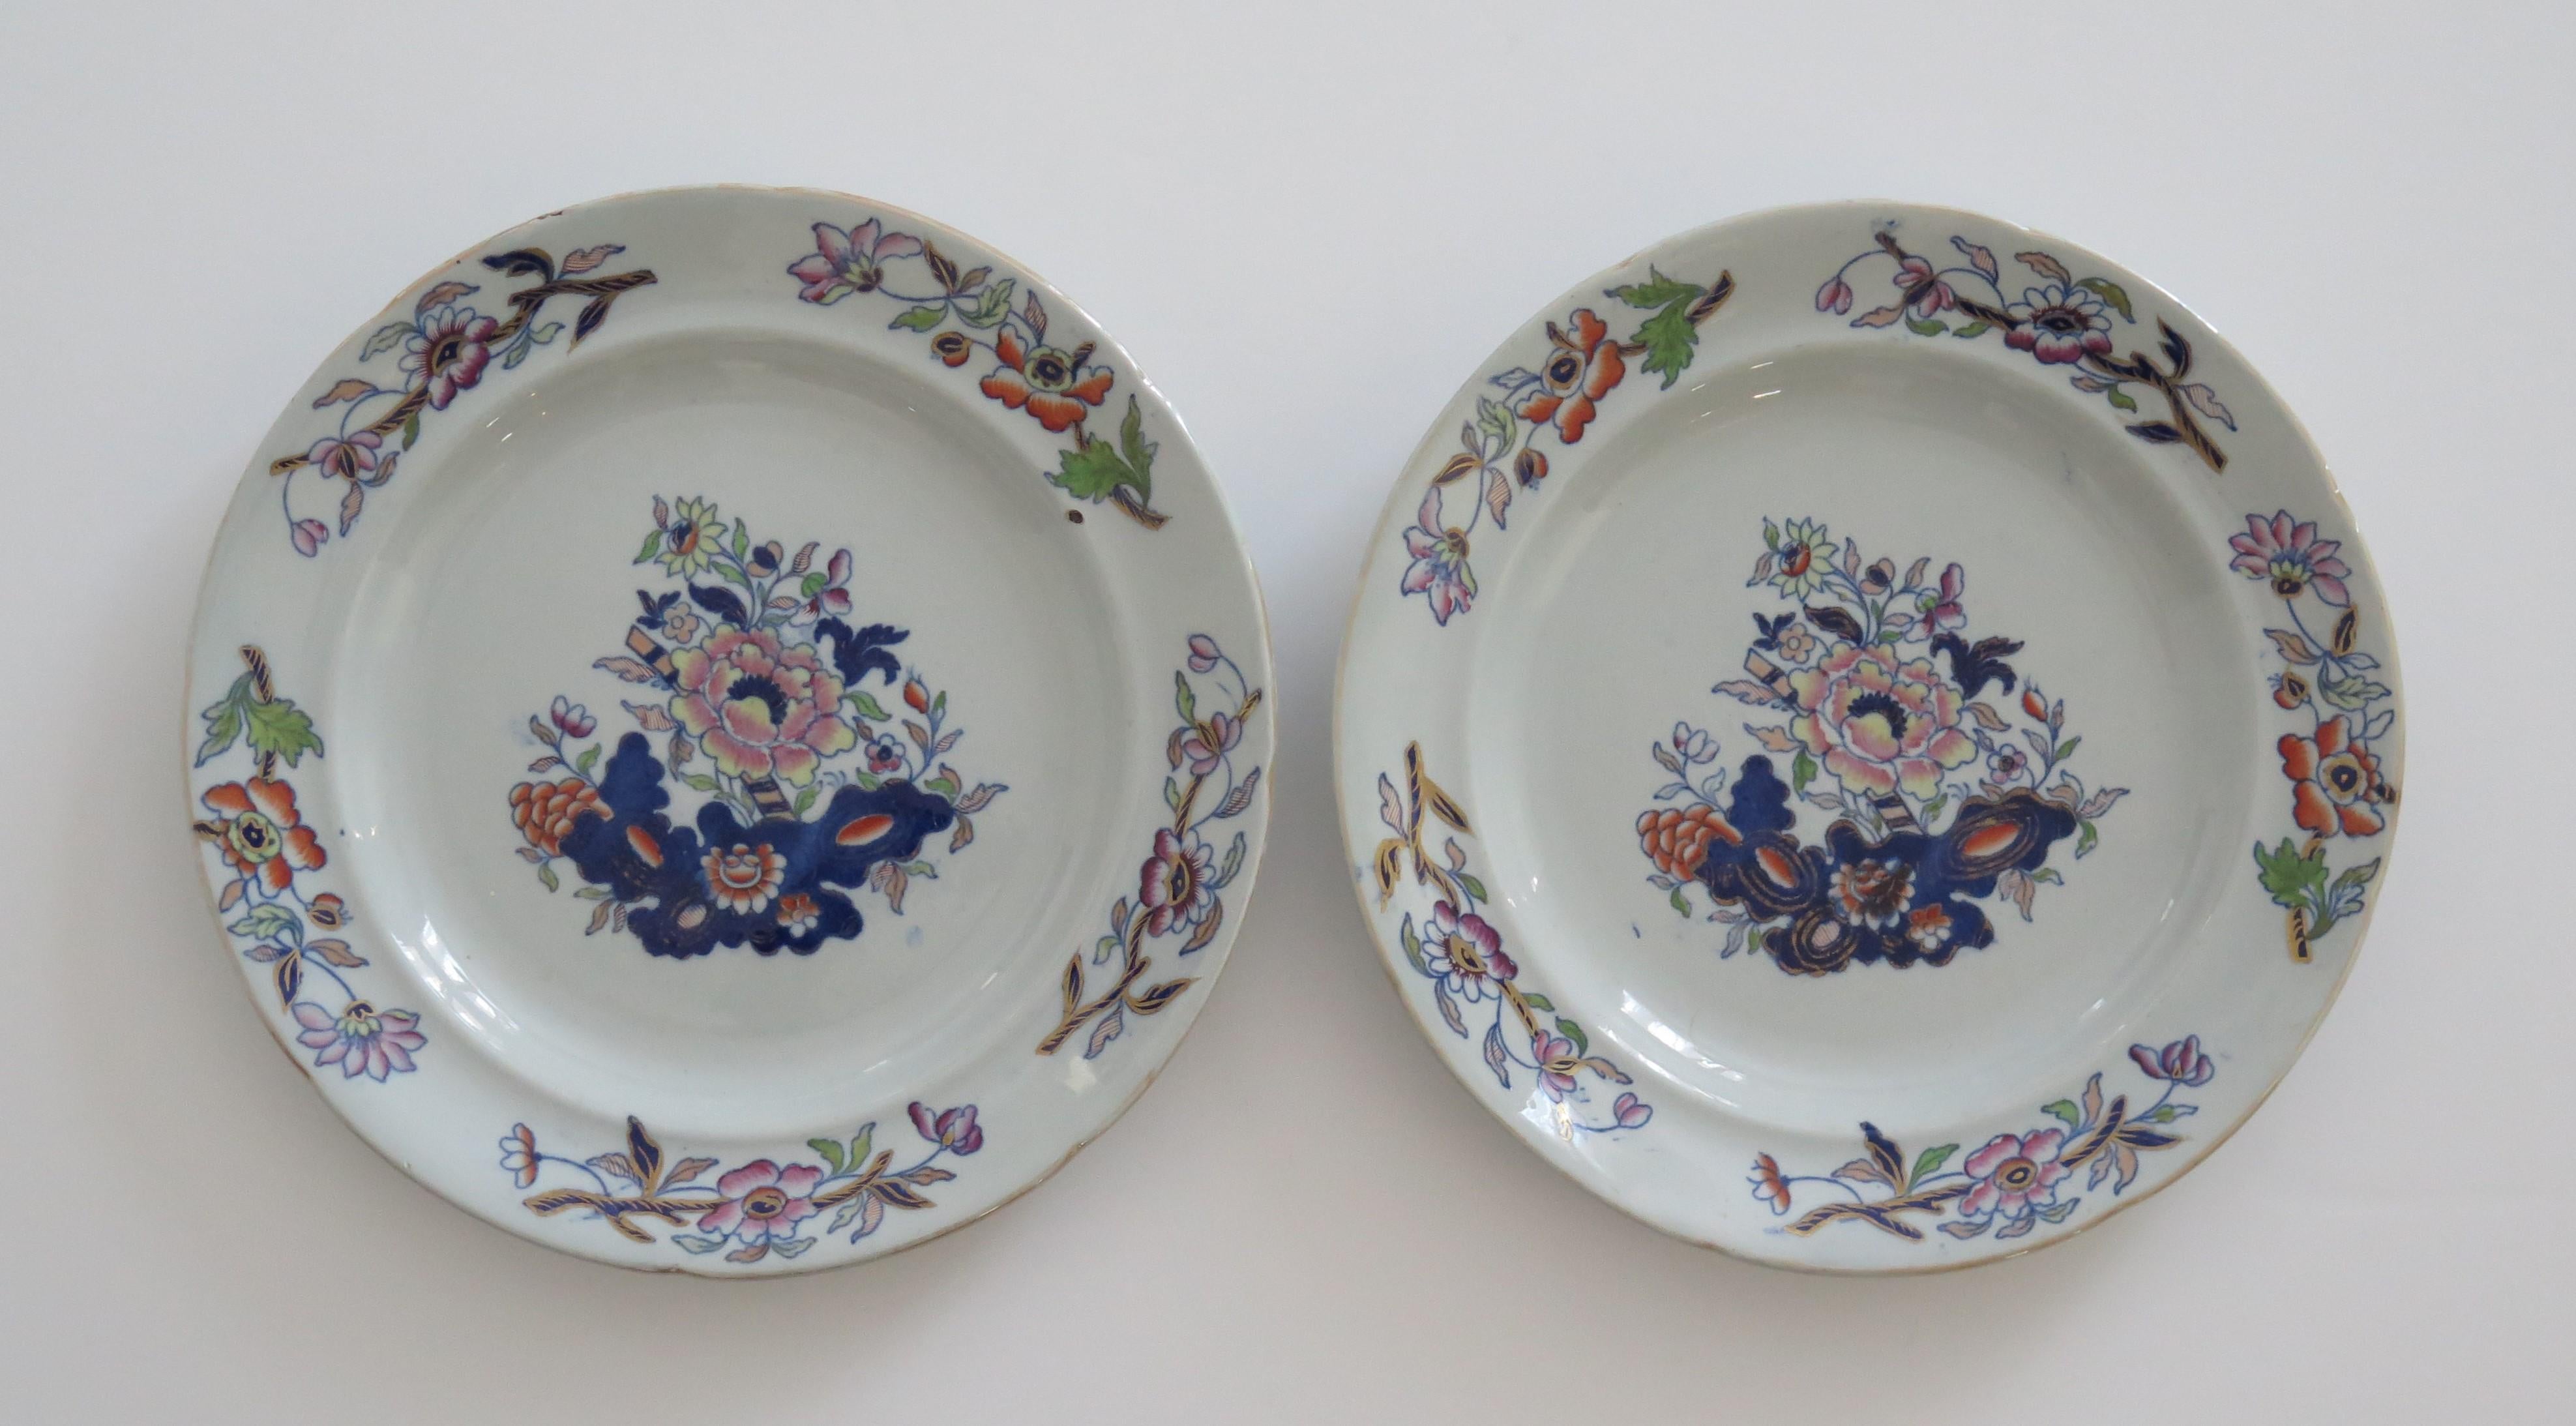 This is a good early pair of dinner plates, hand painted ironstone (stone china ) made by William Davenport and Co., longport, staffordshire potteries, England, George 111rd period, circa 1815.

The pattern is number 